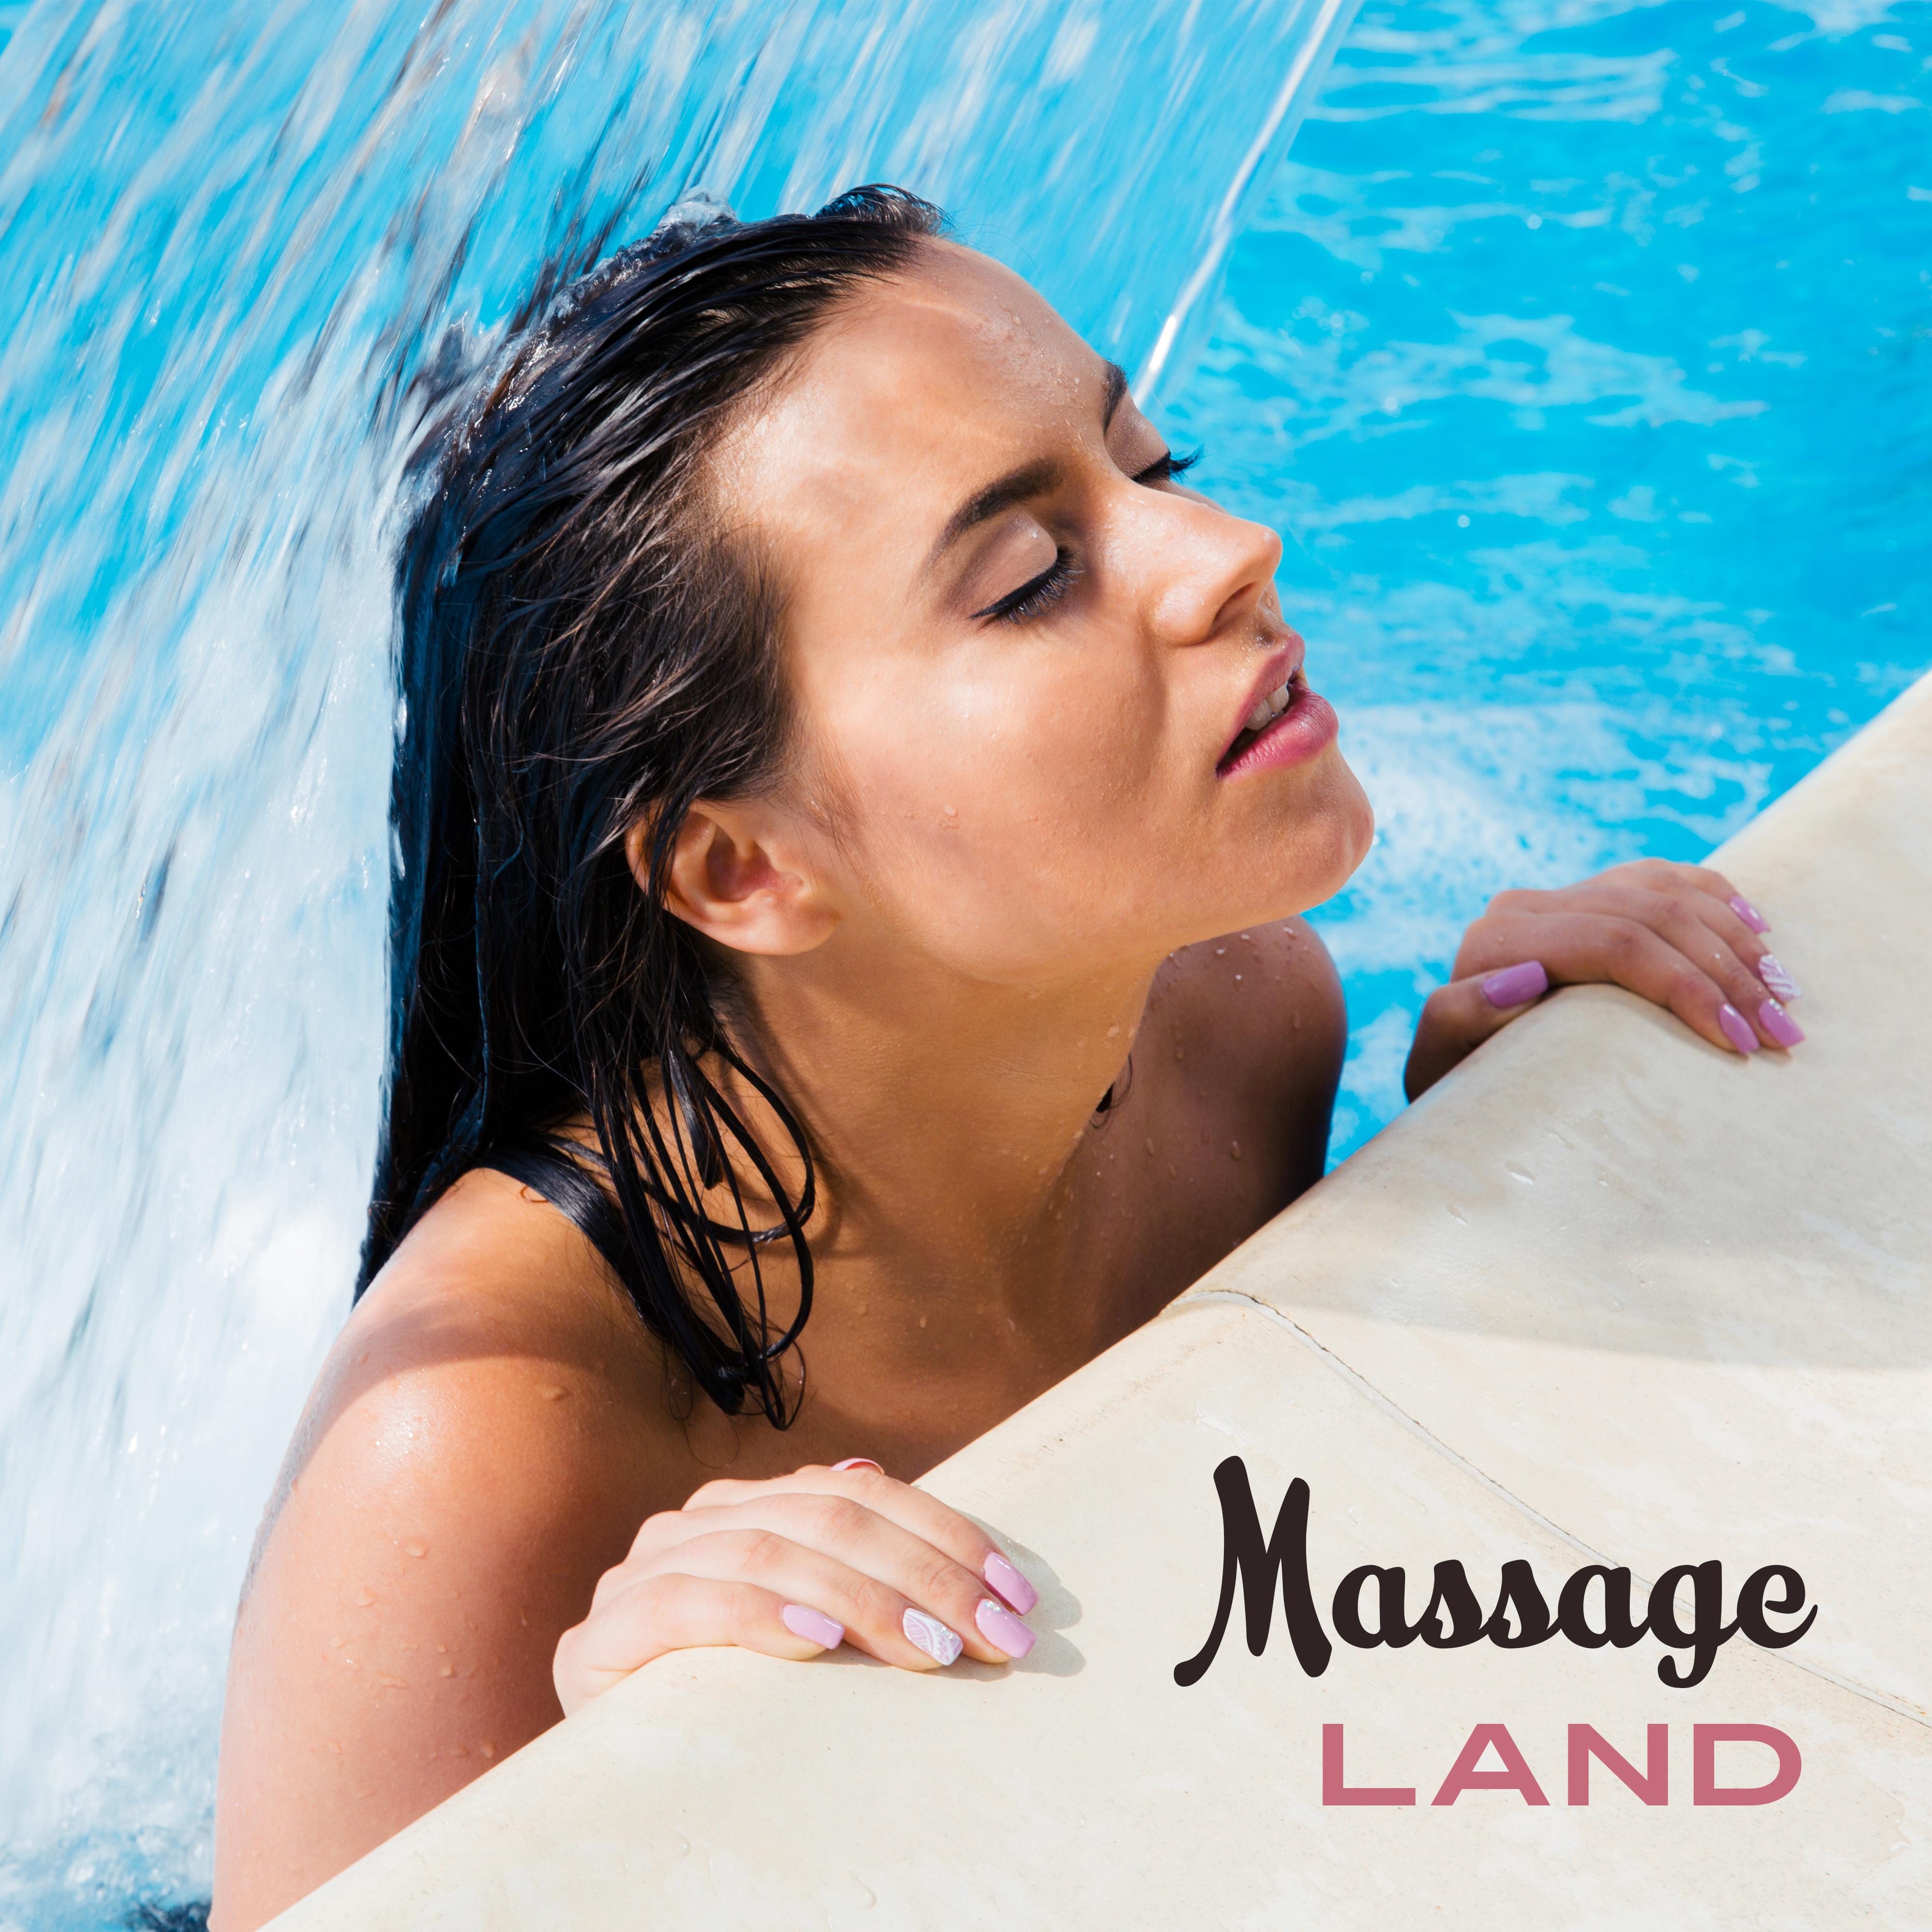 Massage Land  Relaxing Music for Variety of Massage, Chocolate Massage, Classic Massage, Spa, Relaxation